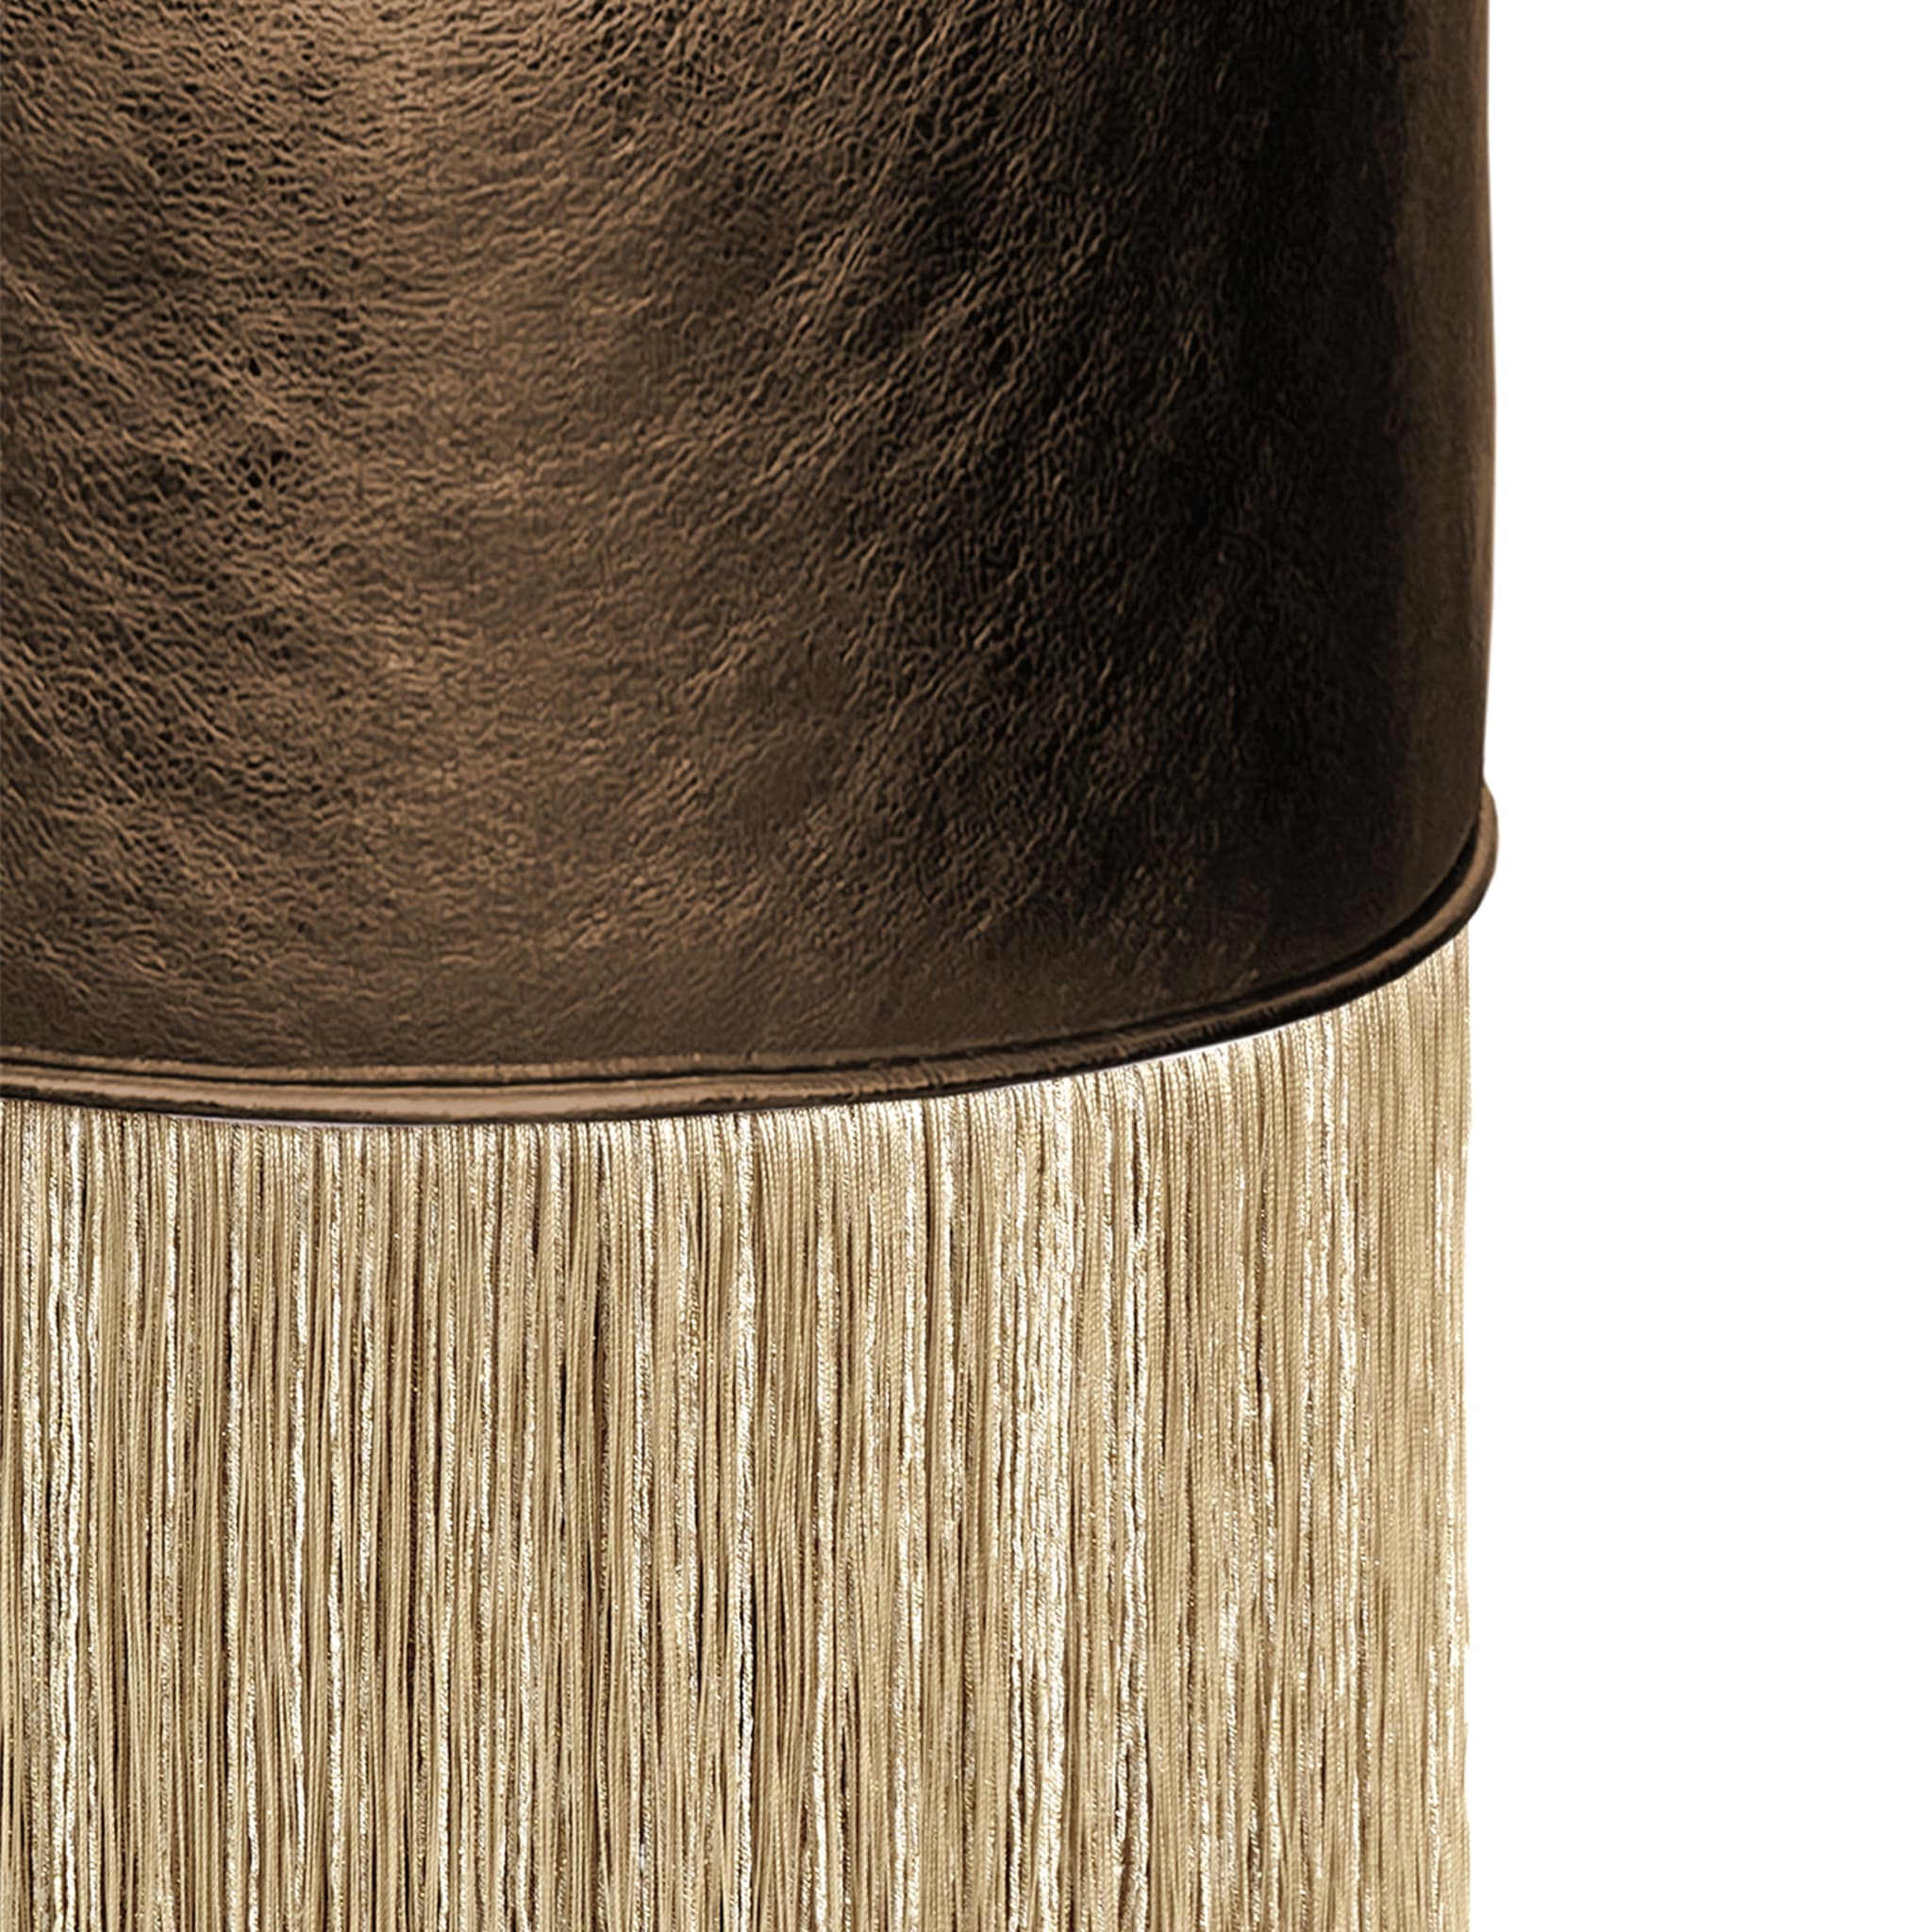 Gleaming Brown Leather Gold Fringes Pouf by Lorenza Bozzoli - Alternative view 1